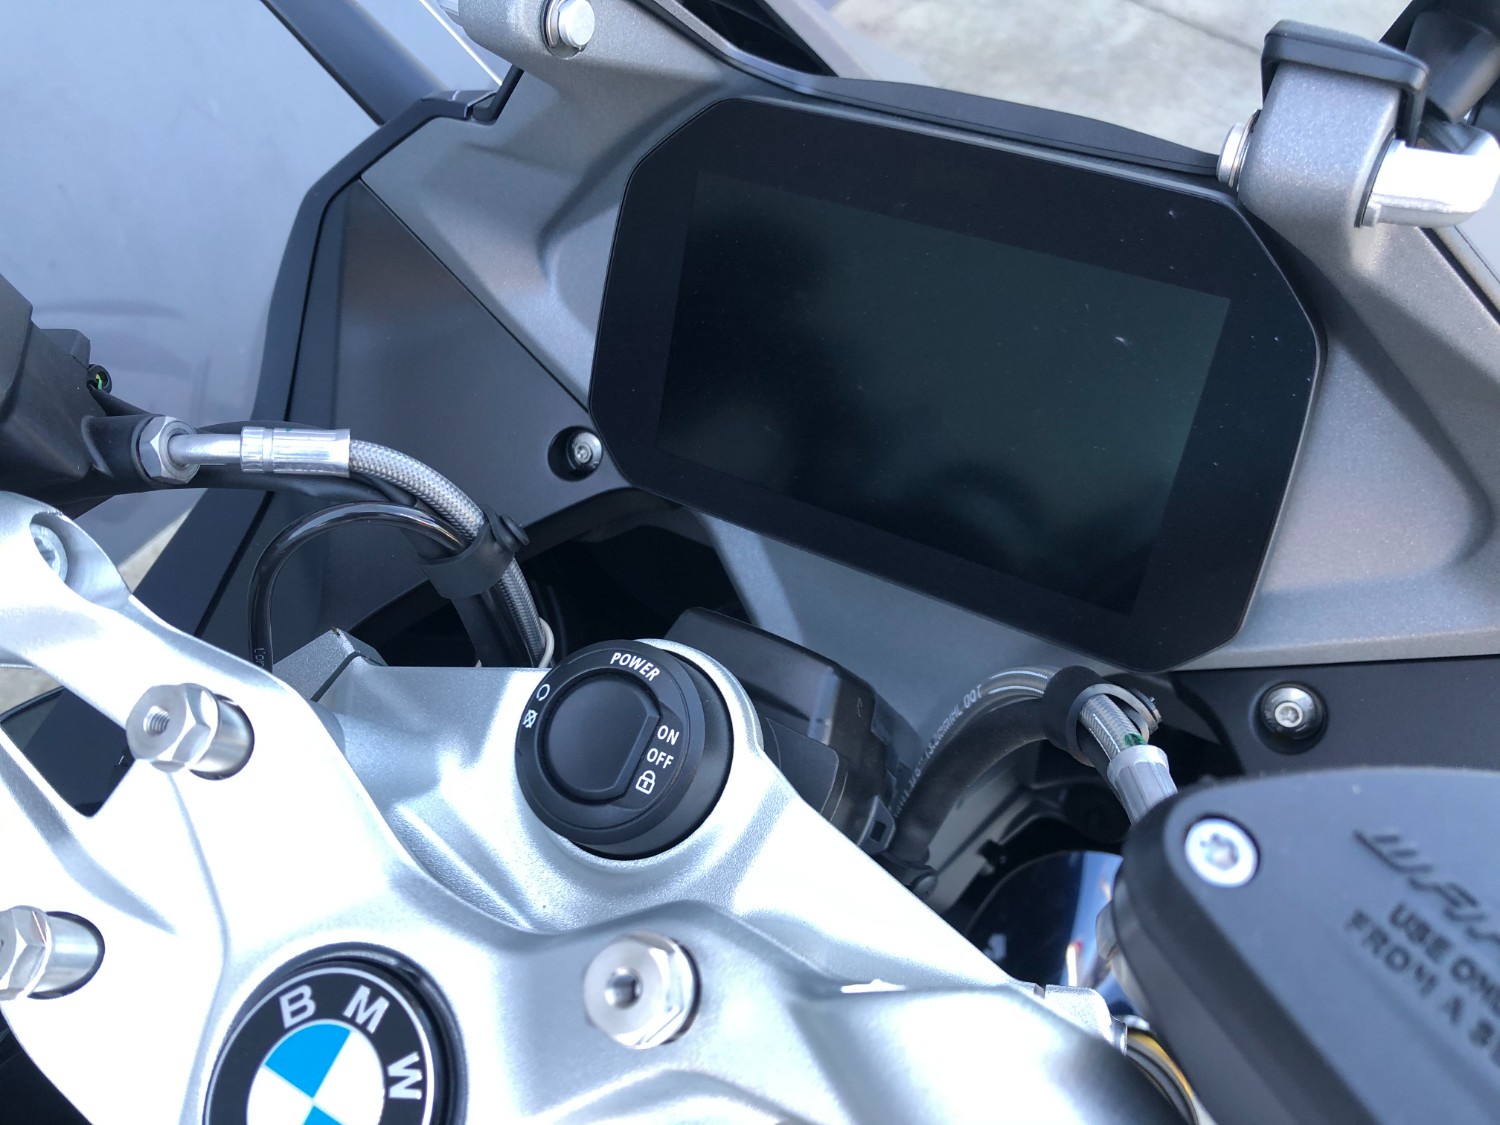 2019 BMW R1250 RS Exclusive Motorcycle Image 22